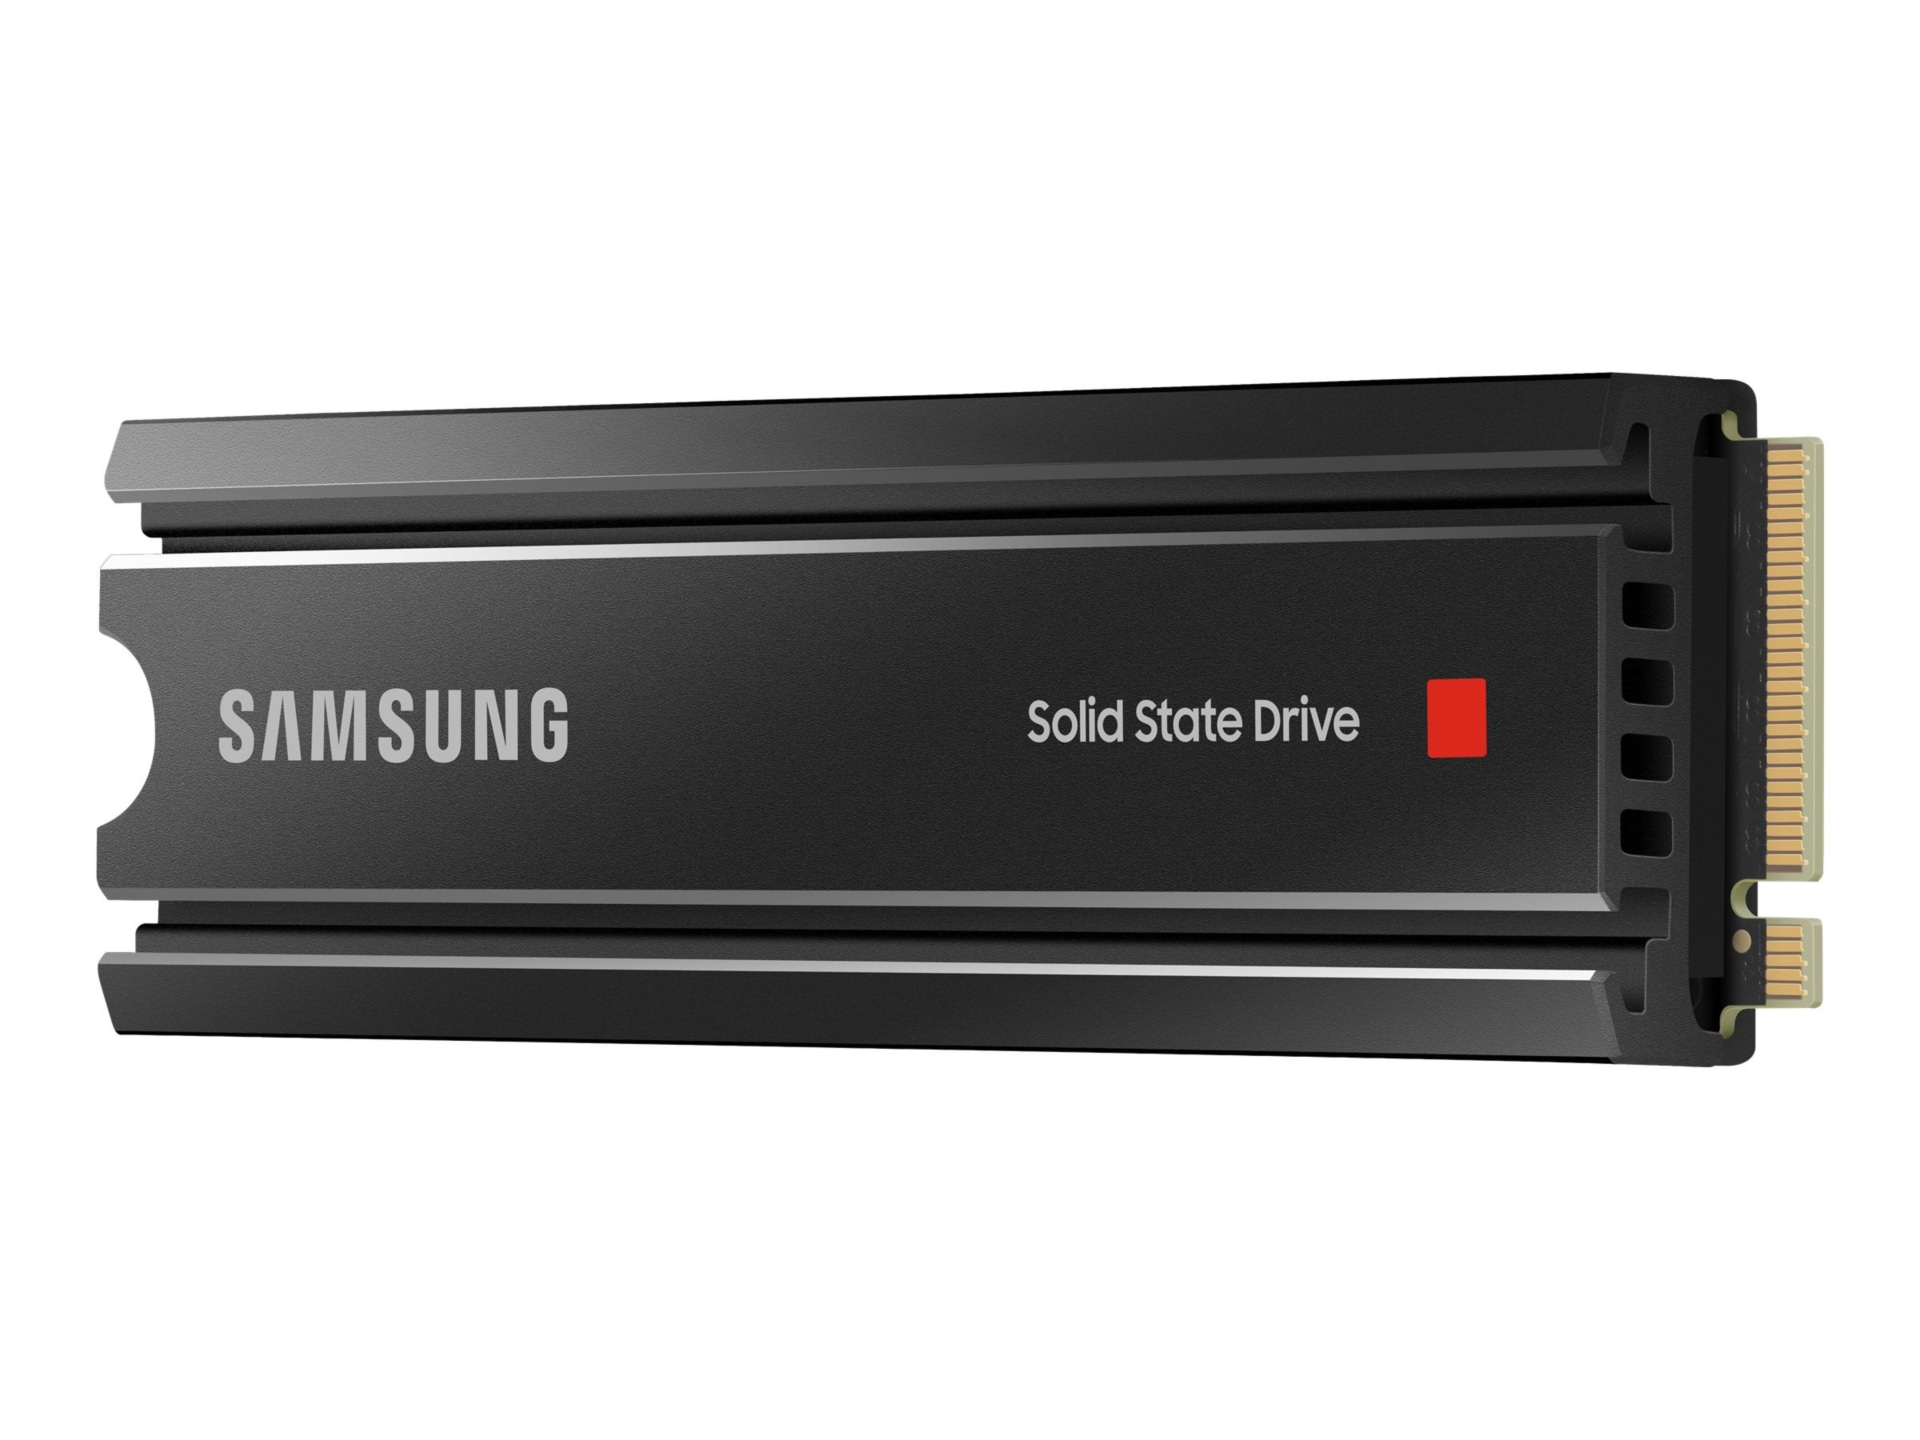 Samsung 980 PRO MZ-V8P1T0CW - SSD - 1 TB - PCIe 4.0 x4 (NVMe) - MZ-V8P1T0CW  - Solid State Drives 